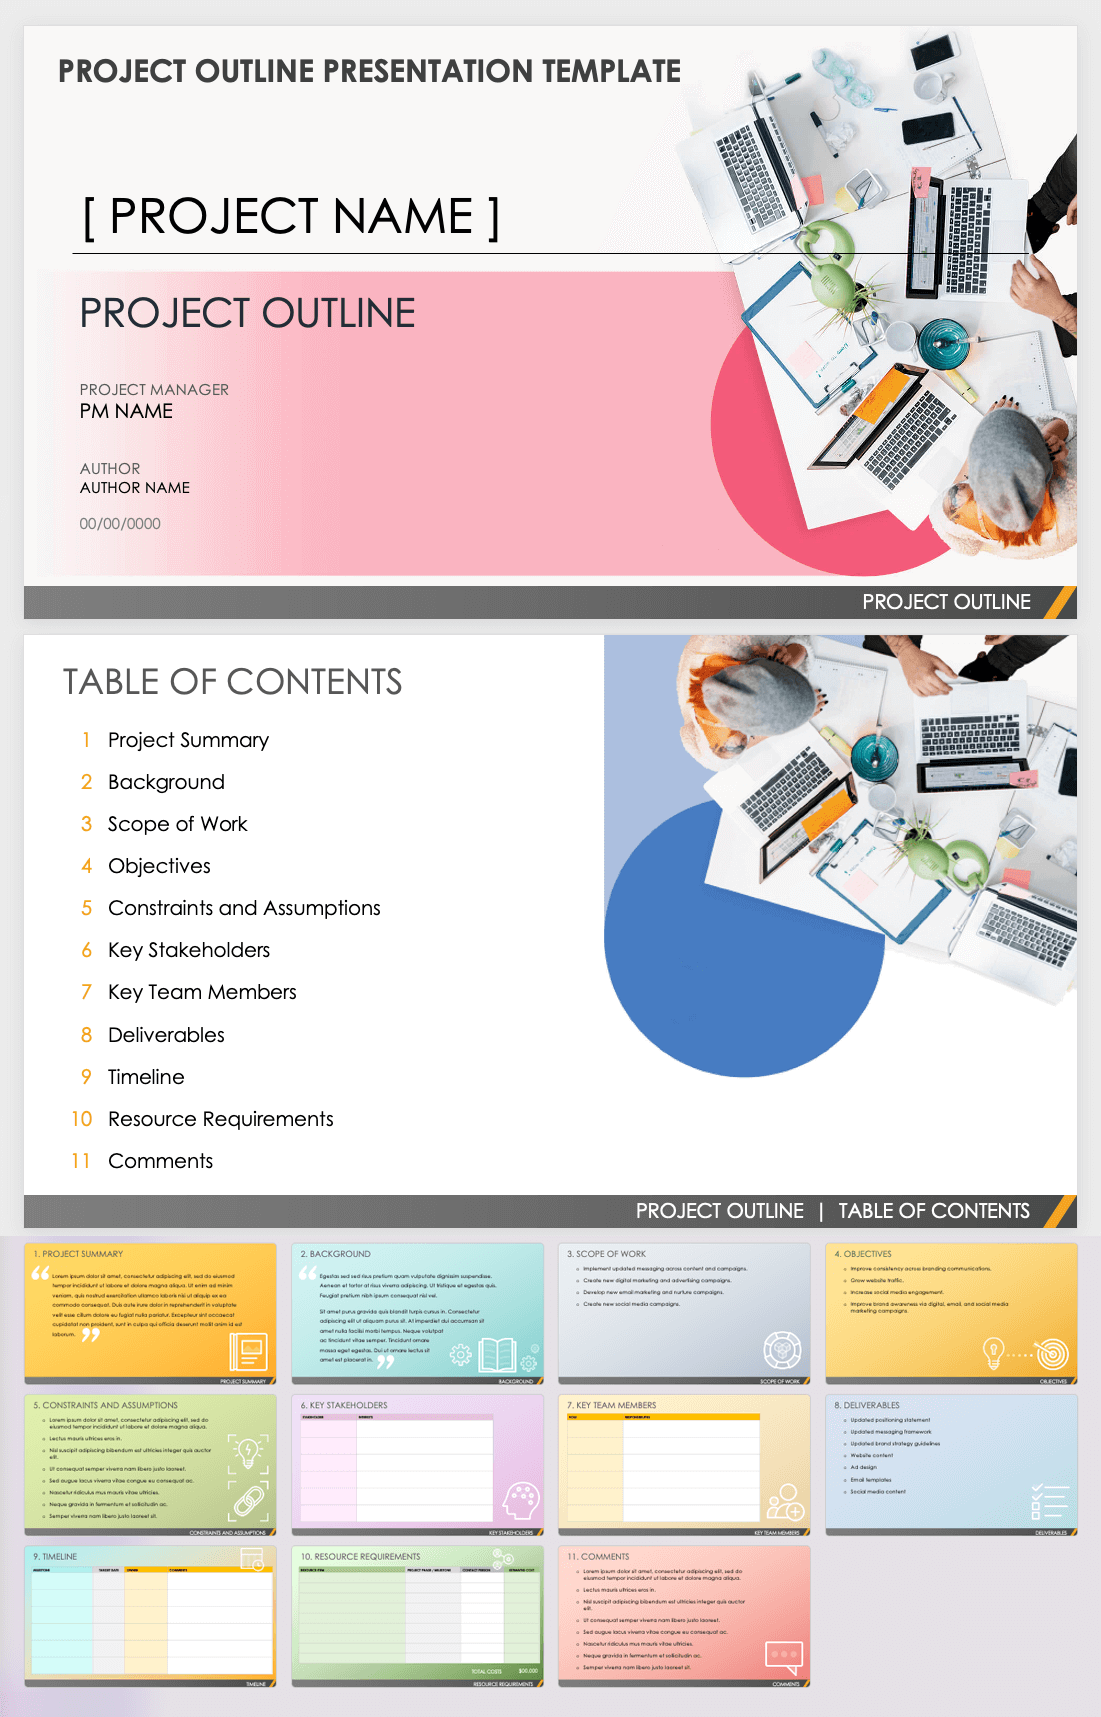 Project Outline Presentation Template 